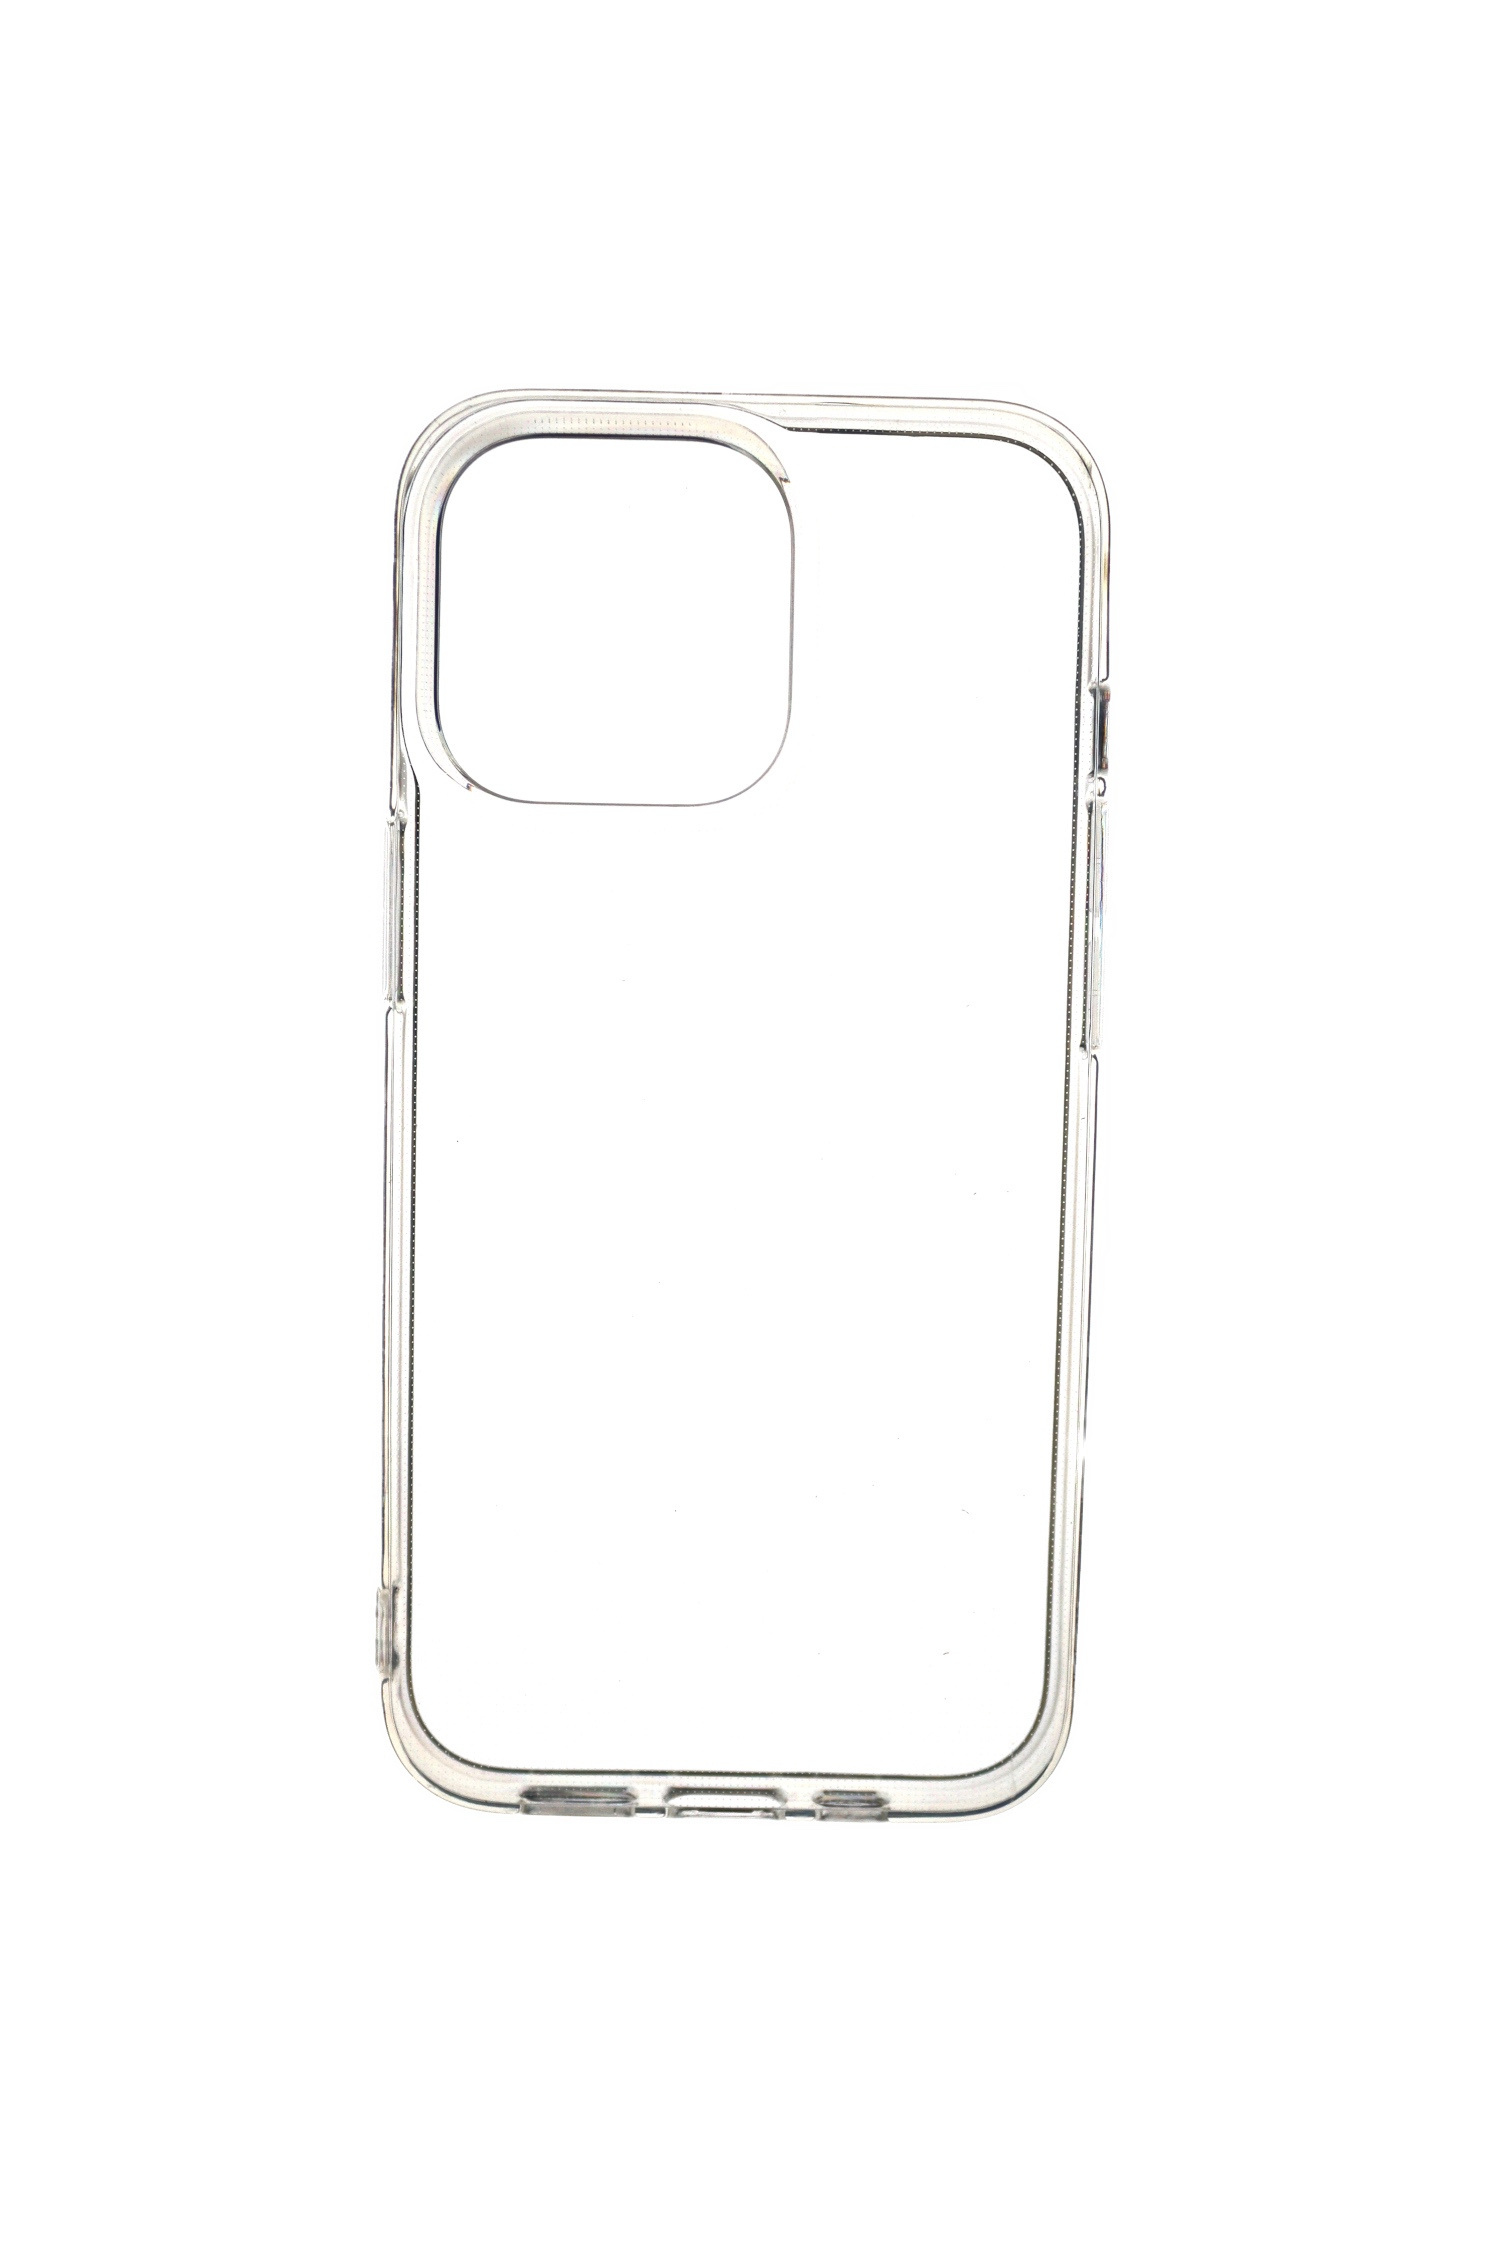 Pro Case 14 JAMCOVER Apple, Strong, Transparent iPhone 2.0 mm Max, Backcover, TPU